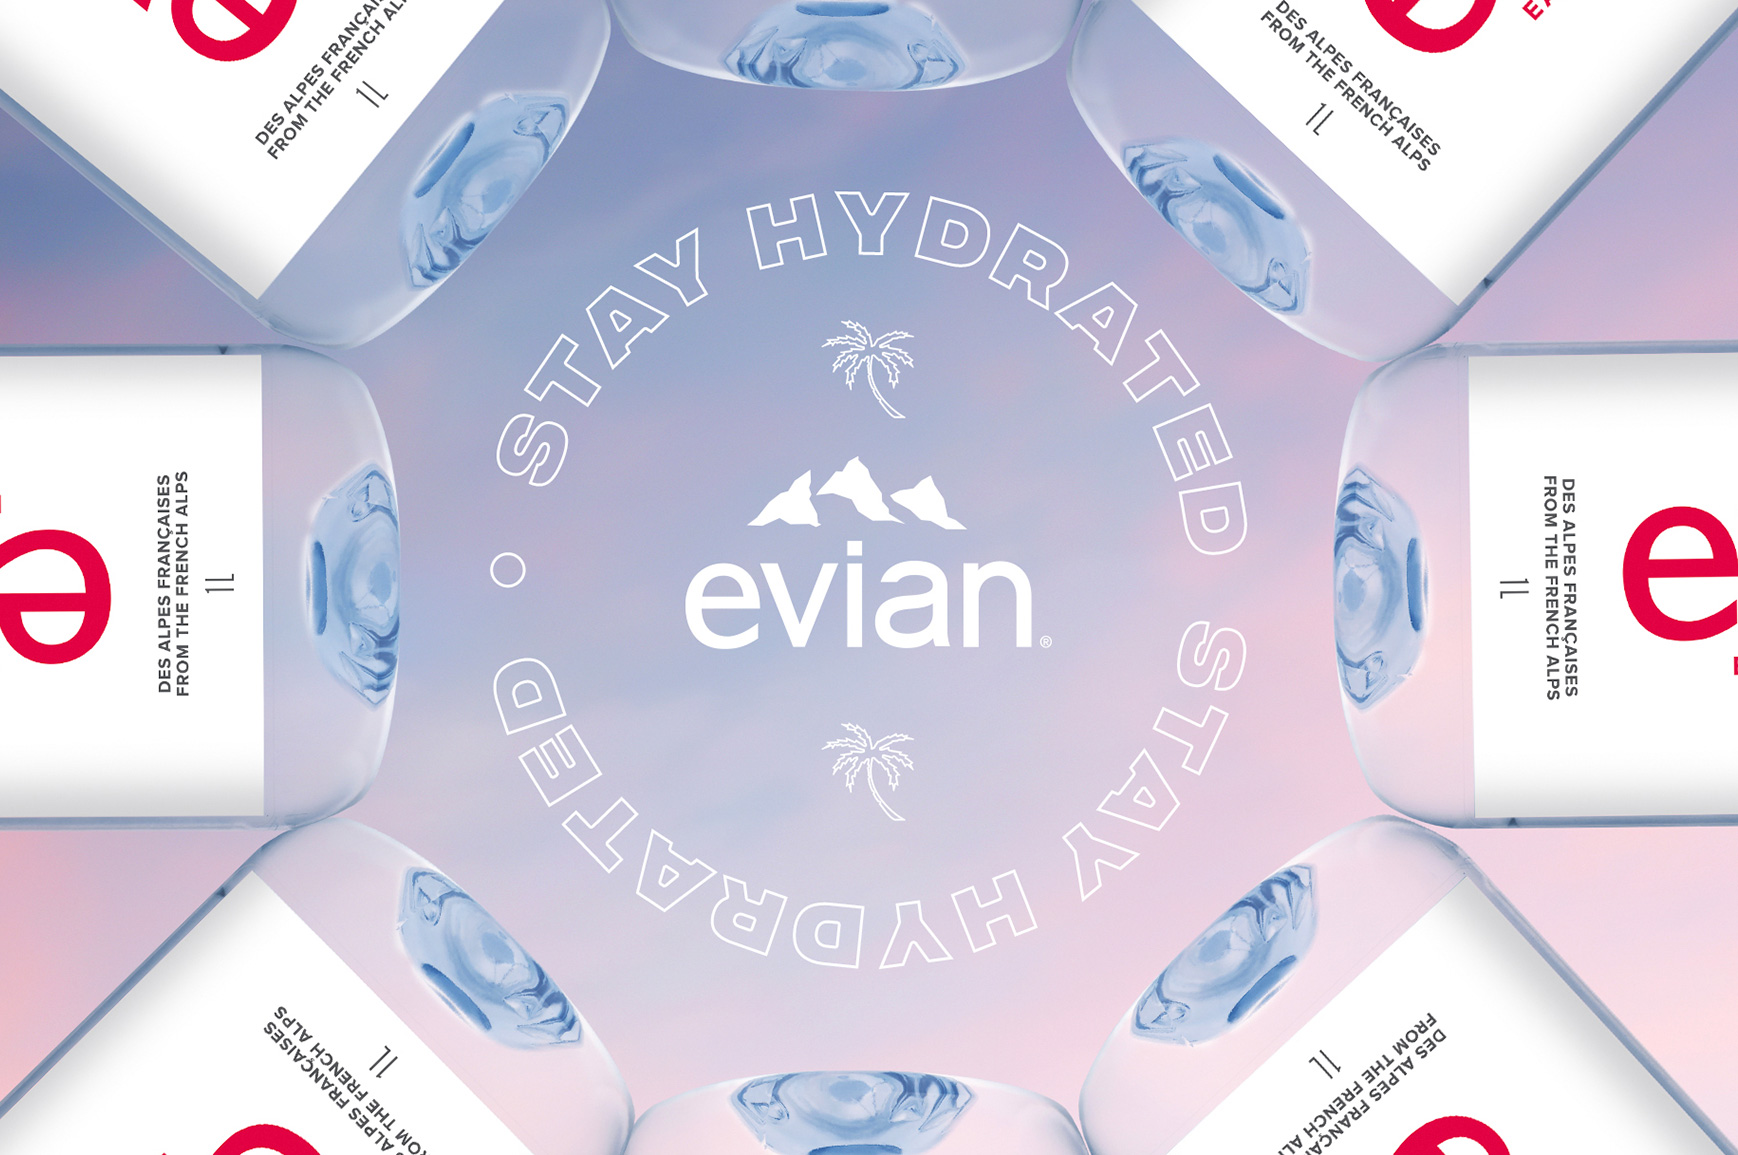 evian Global — #StayHydrated